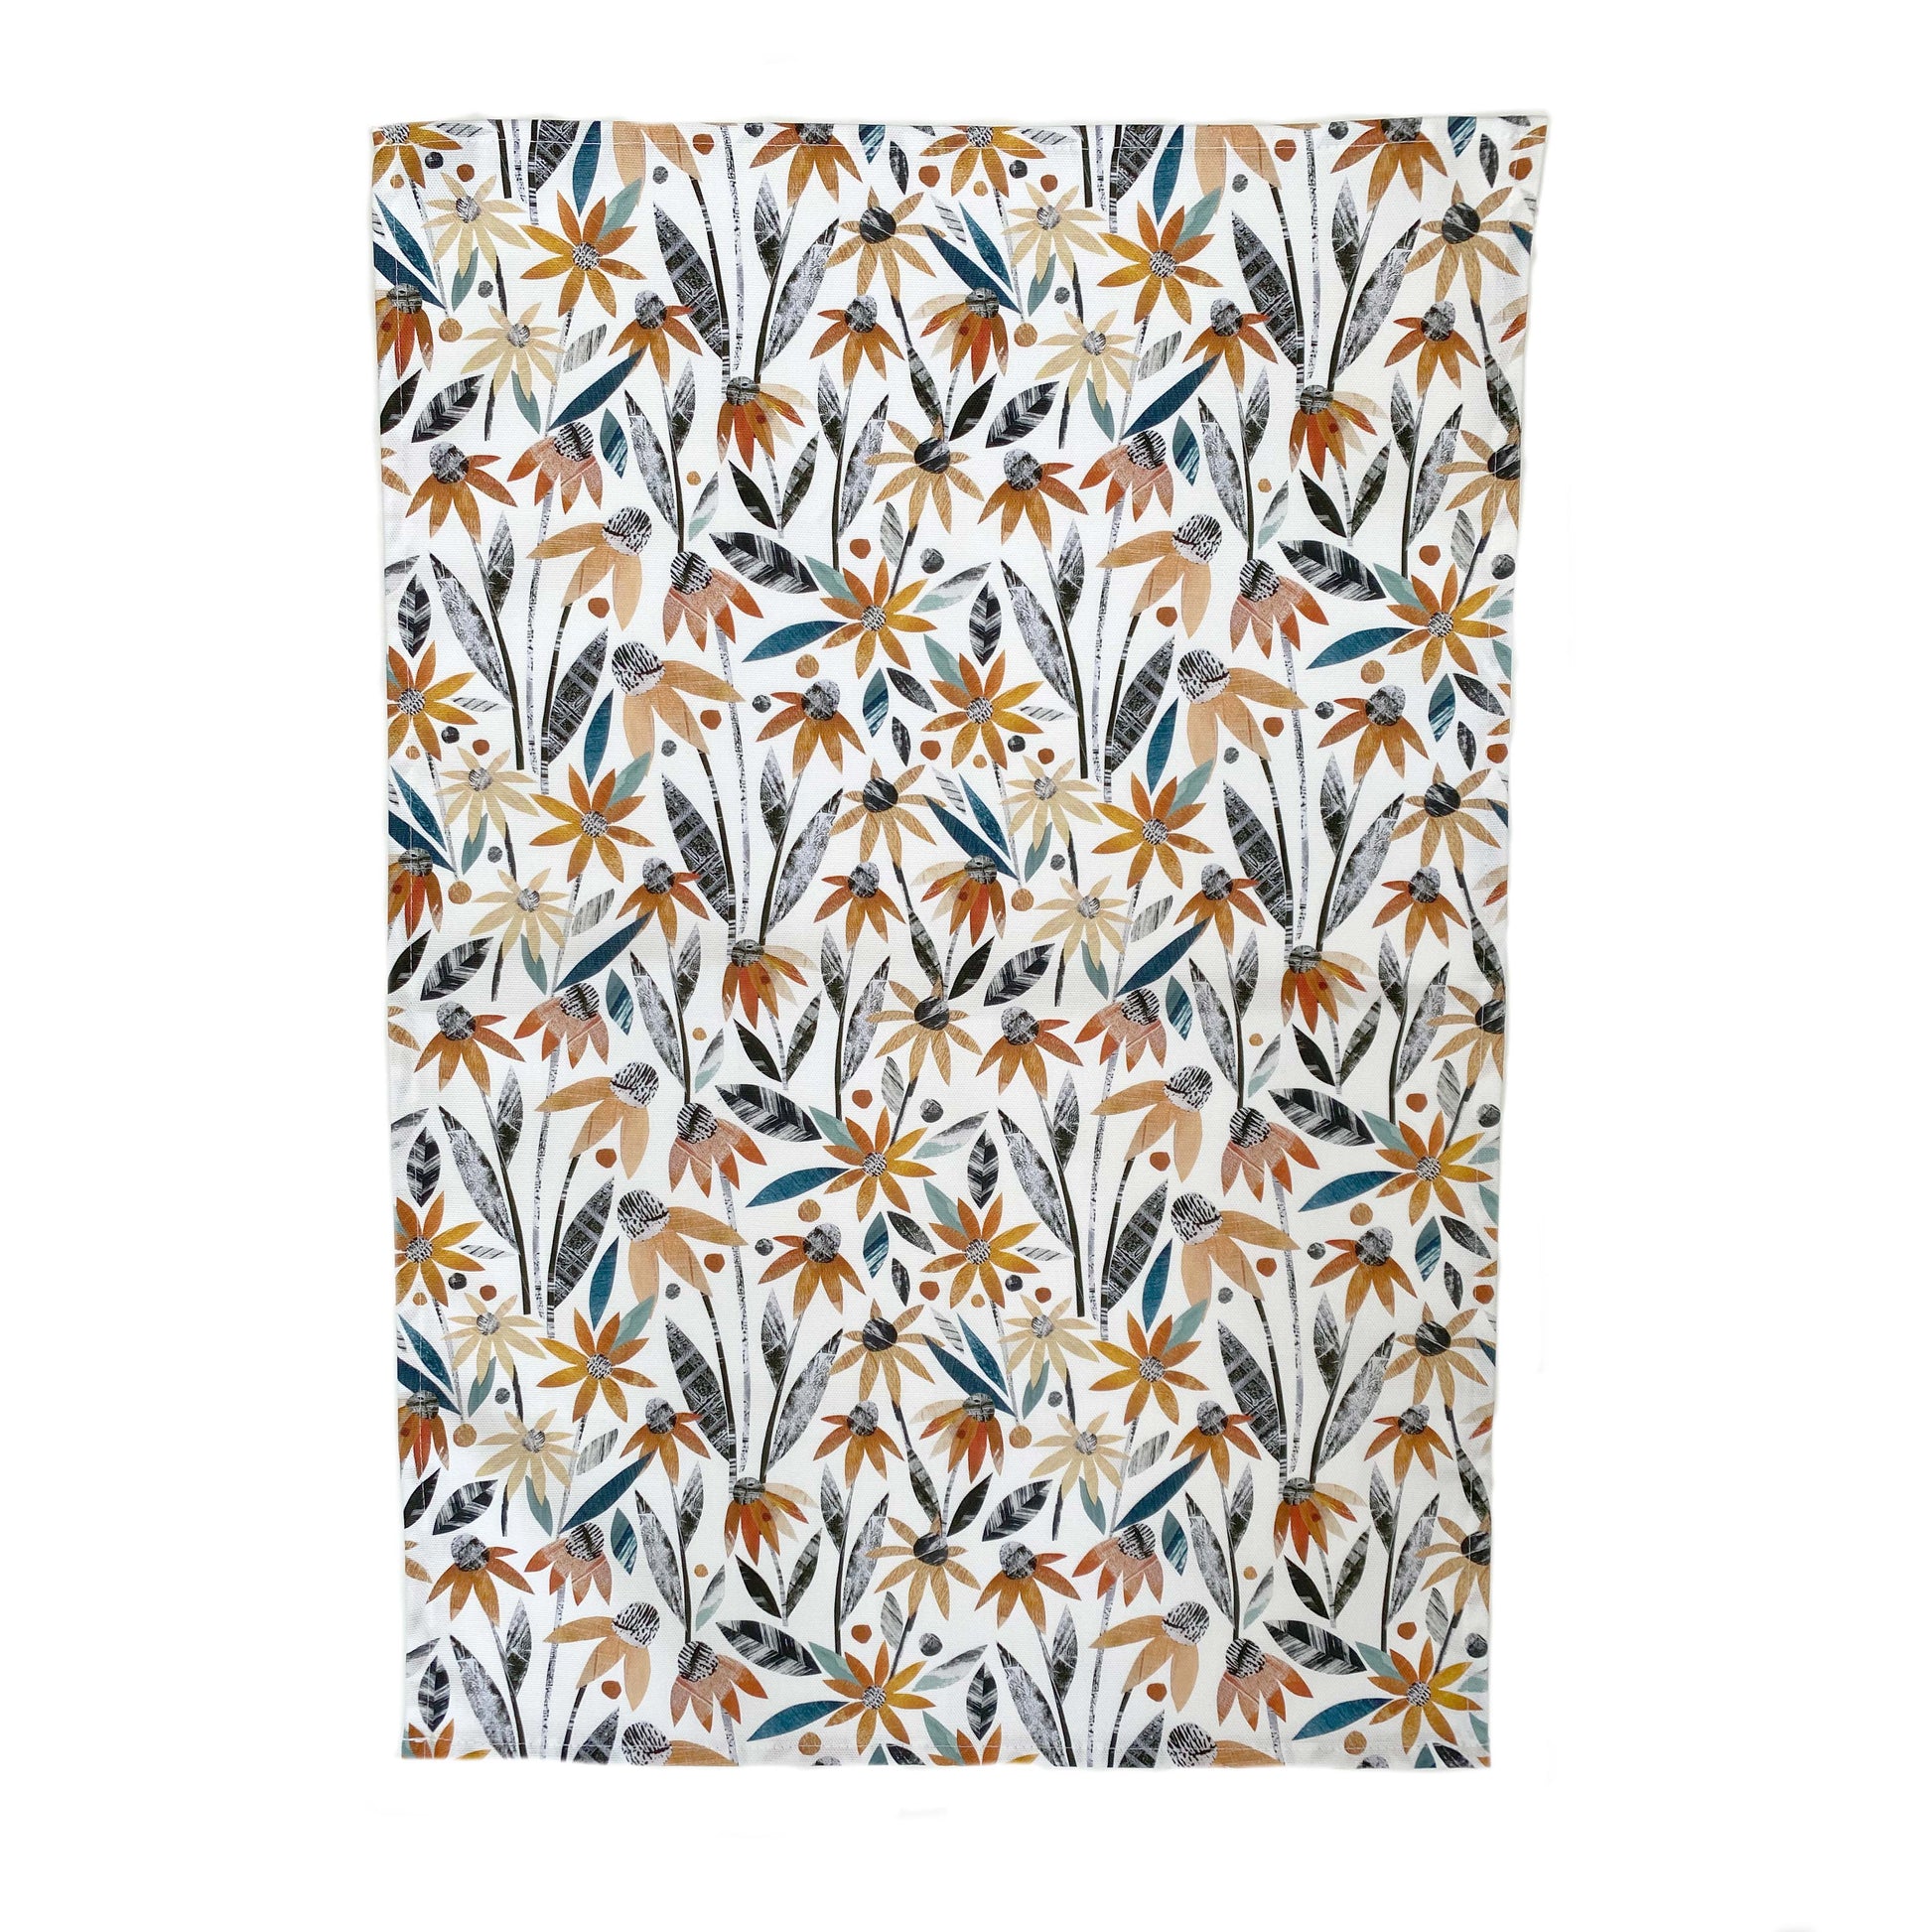 A whole Rudbeckia Tea Towel featuring Orange Conflowers with soft Green and Grey Leaves on a plain white background is shown on a white background.